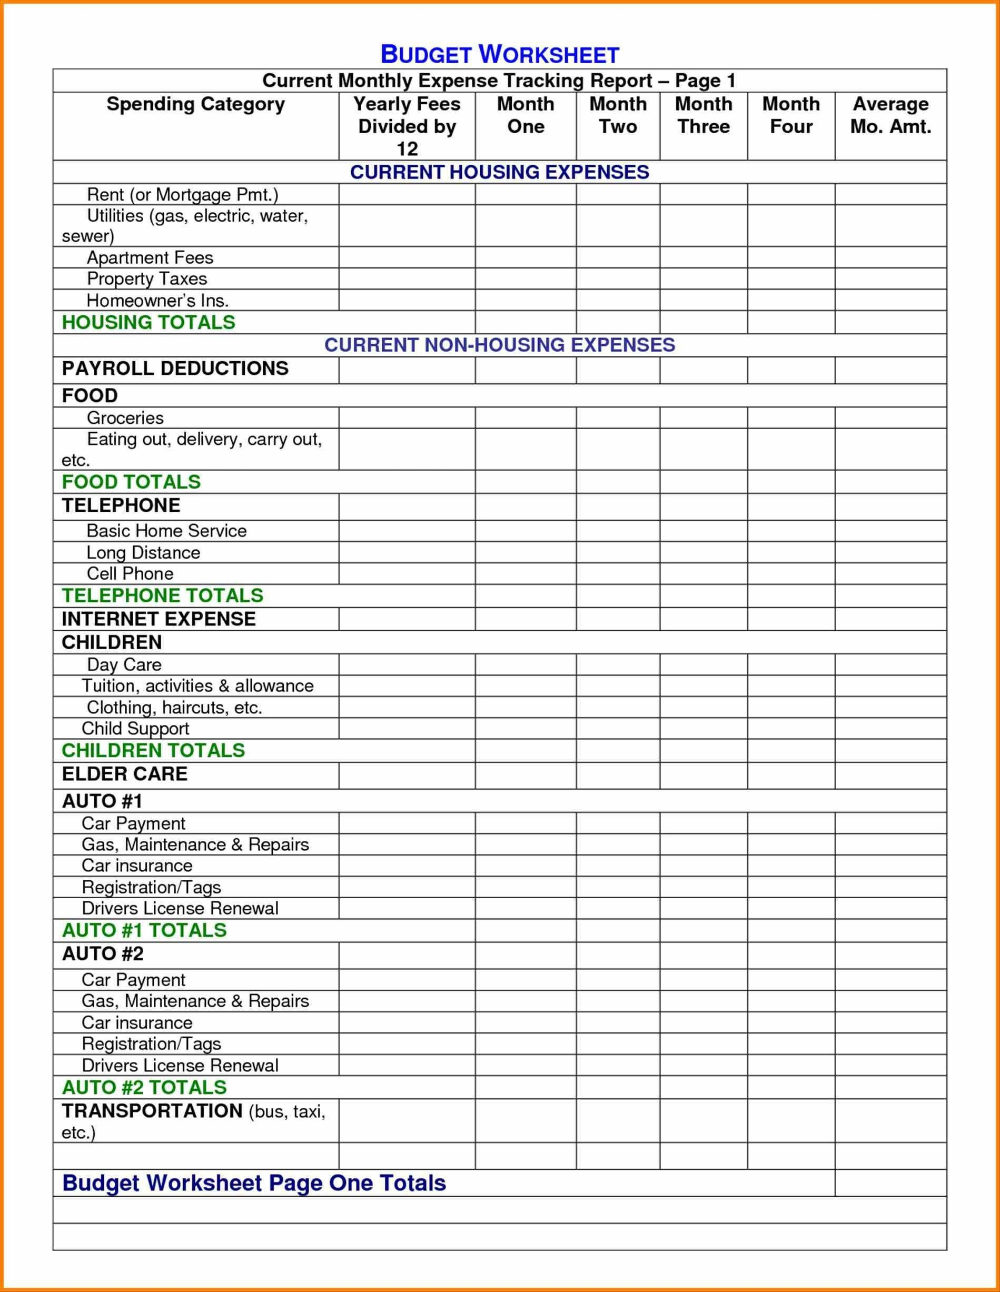 Small Business Annual Budget Template - Entrepreneur For New Business Budget Plan Template Within New Business Budget Plan Template